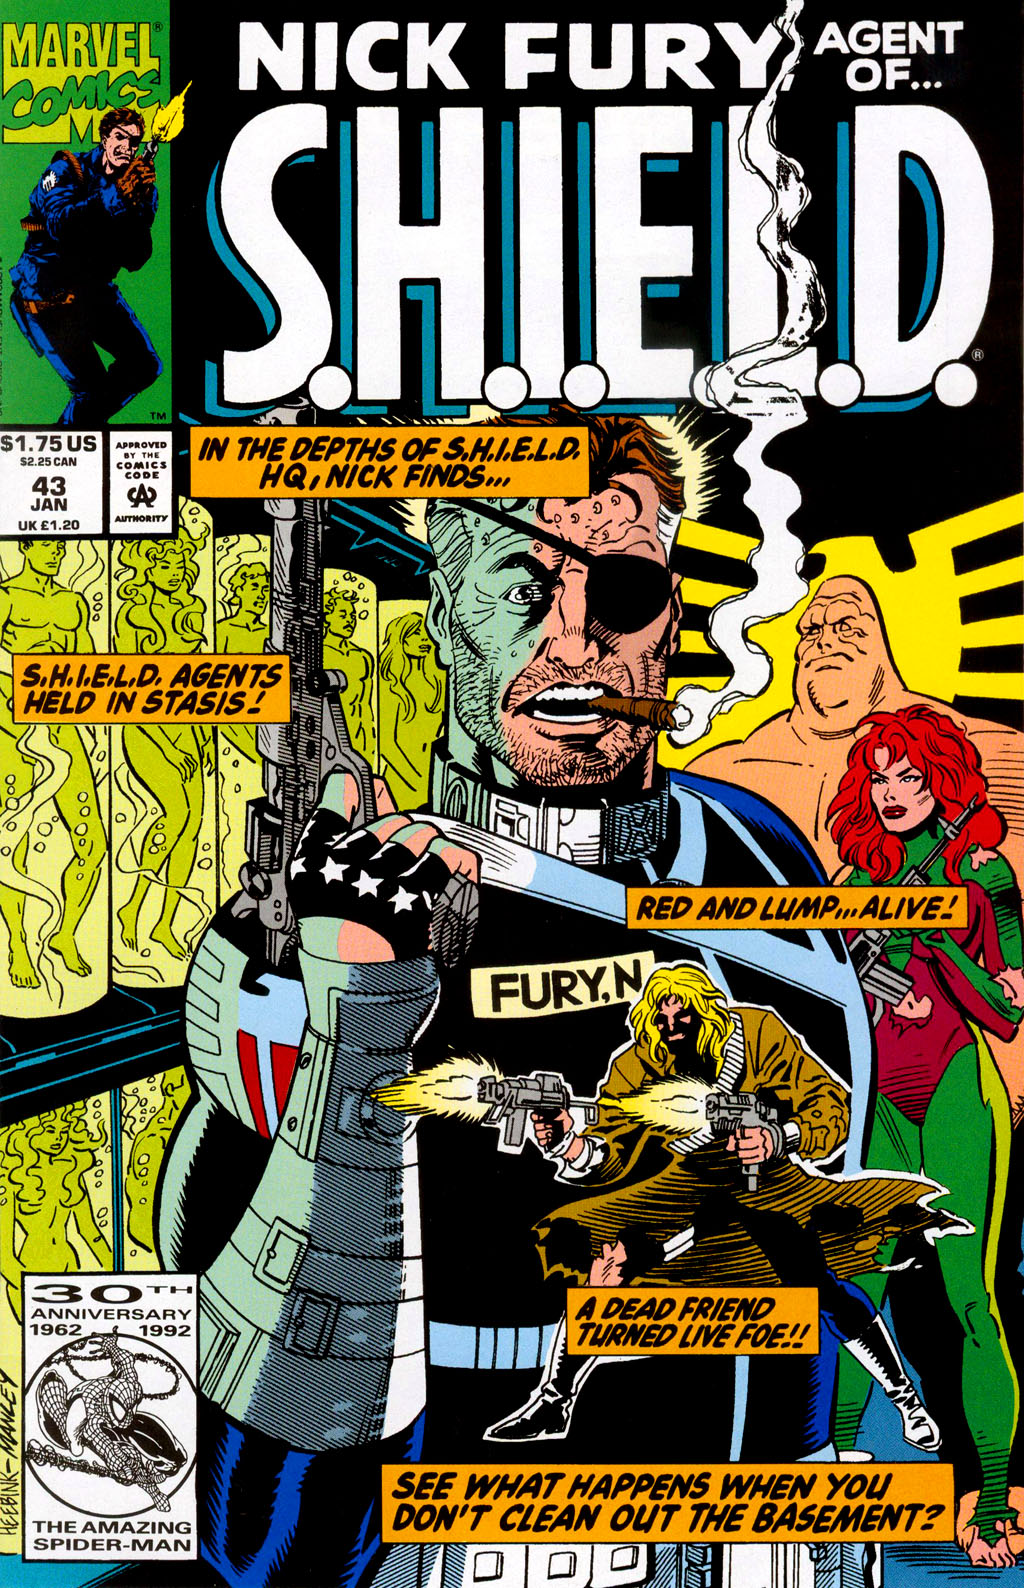 Read online Nick Fury, Agent of S.H.I.E.L.D. comic -  Issue #43 - 1